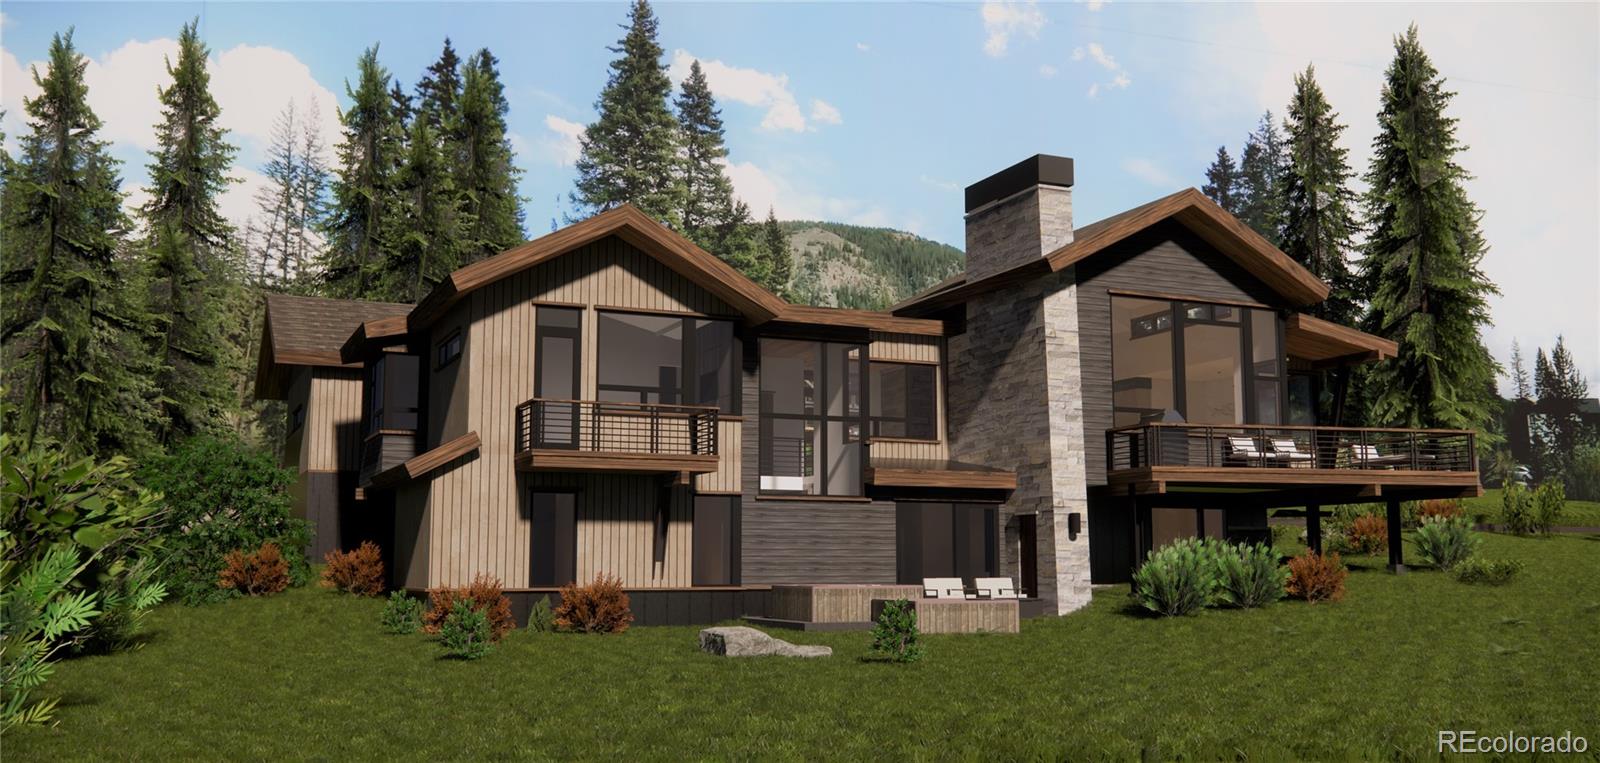 427 Whispering Pines, Blue River, CO